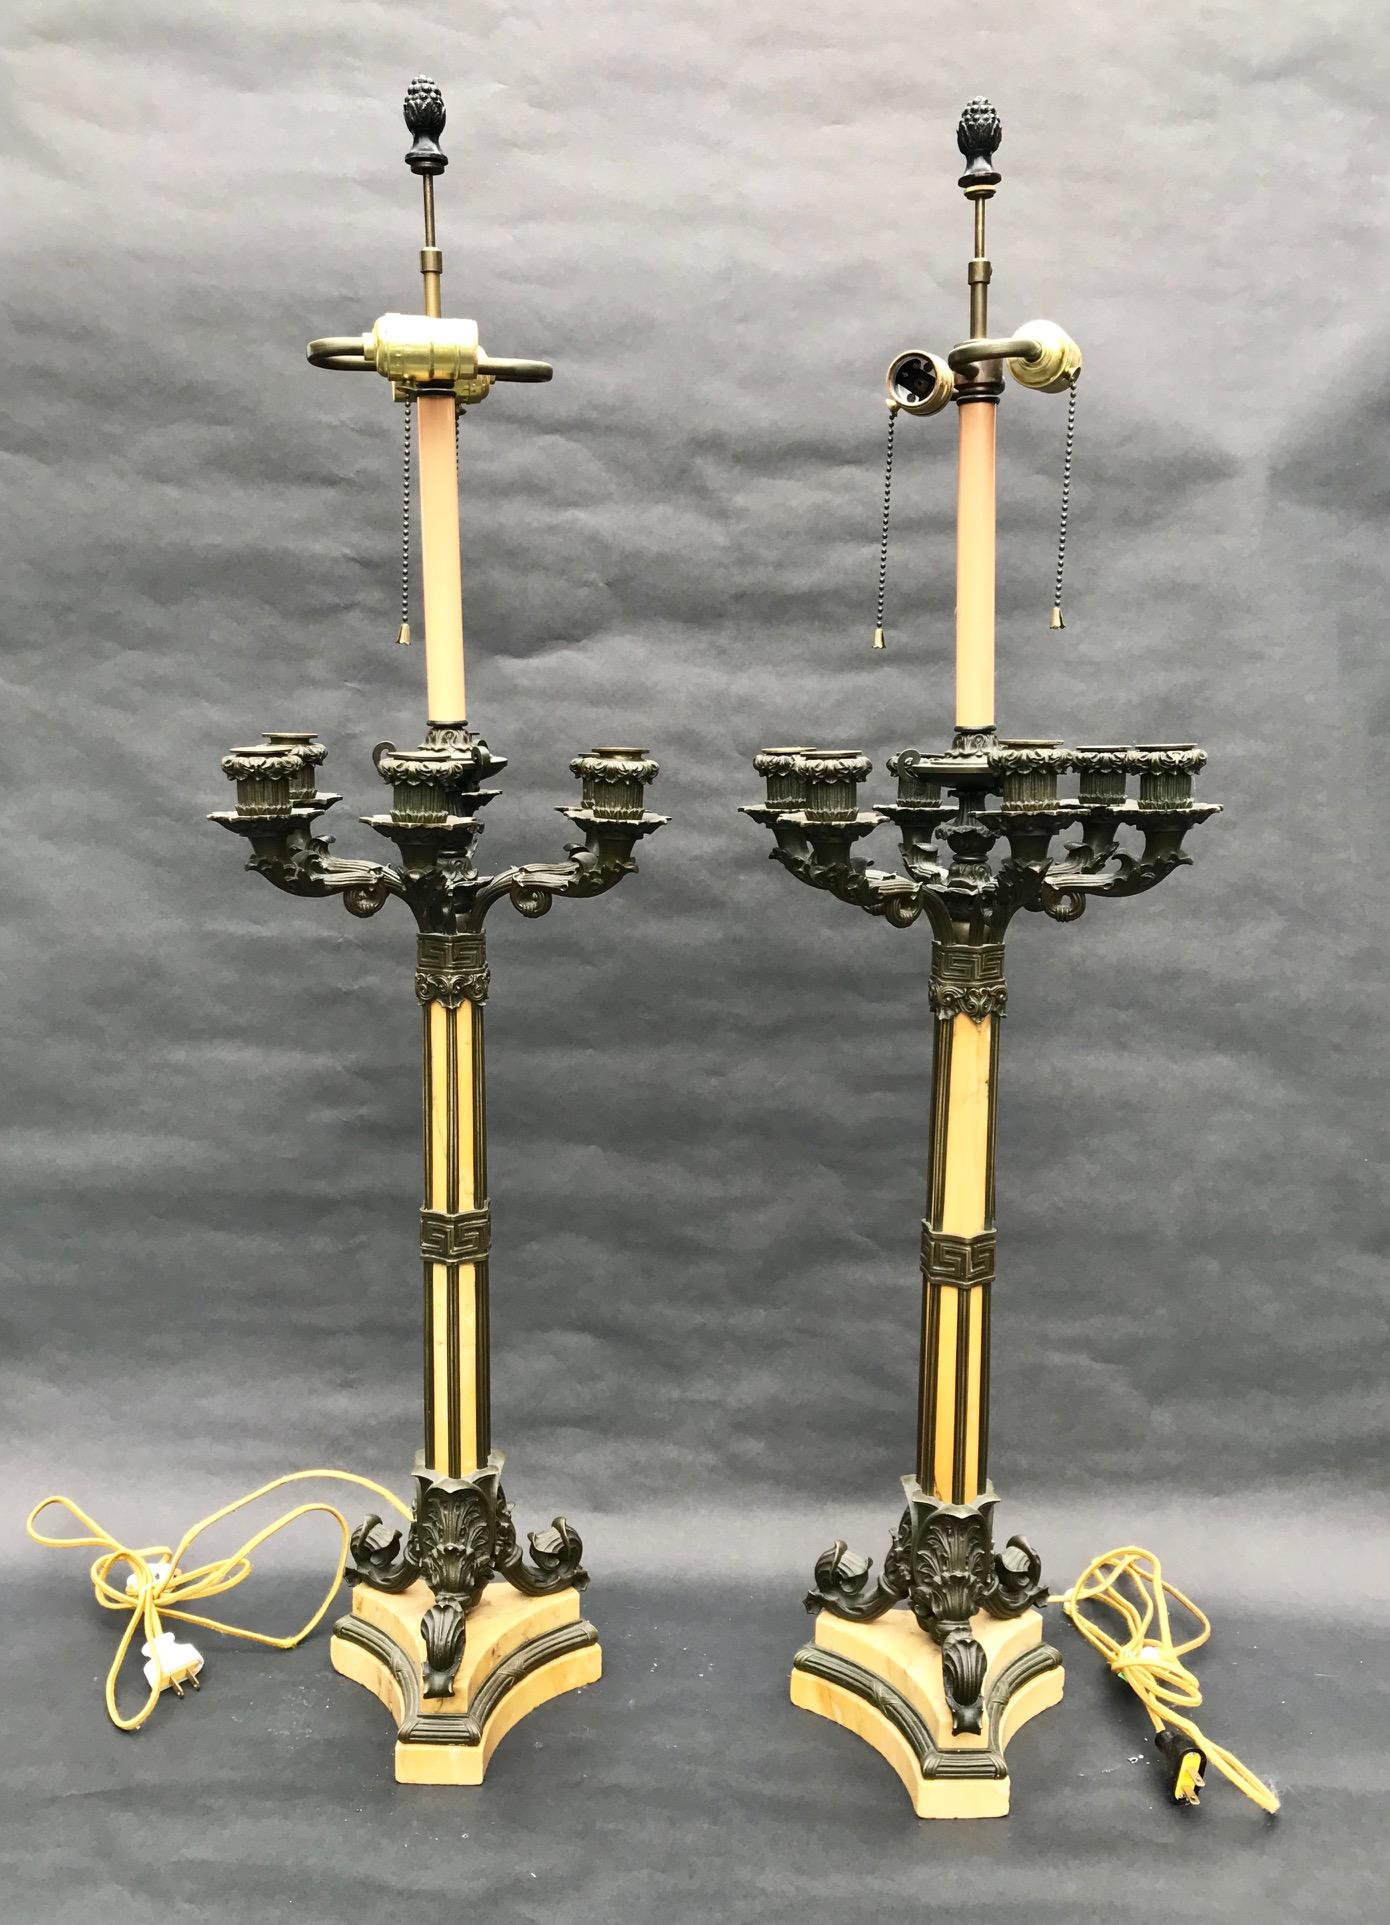 Antique large pair of 19th century French Empire bronze and Siena marble candelabra lamps.

This is a superb rare and large pair of French 19th century Empire period five light candelabra lamps. Each candelabra has five patinated bronze arms mounted